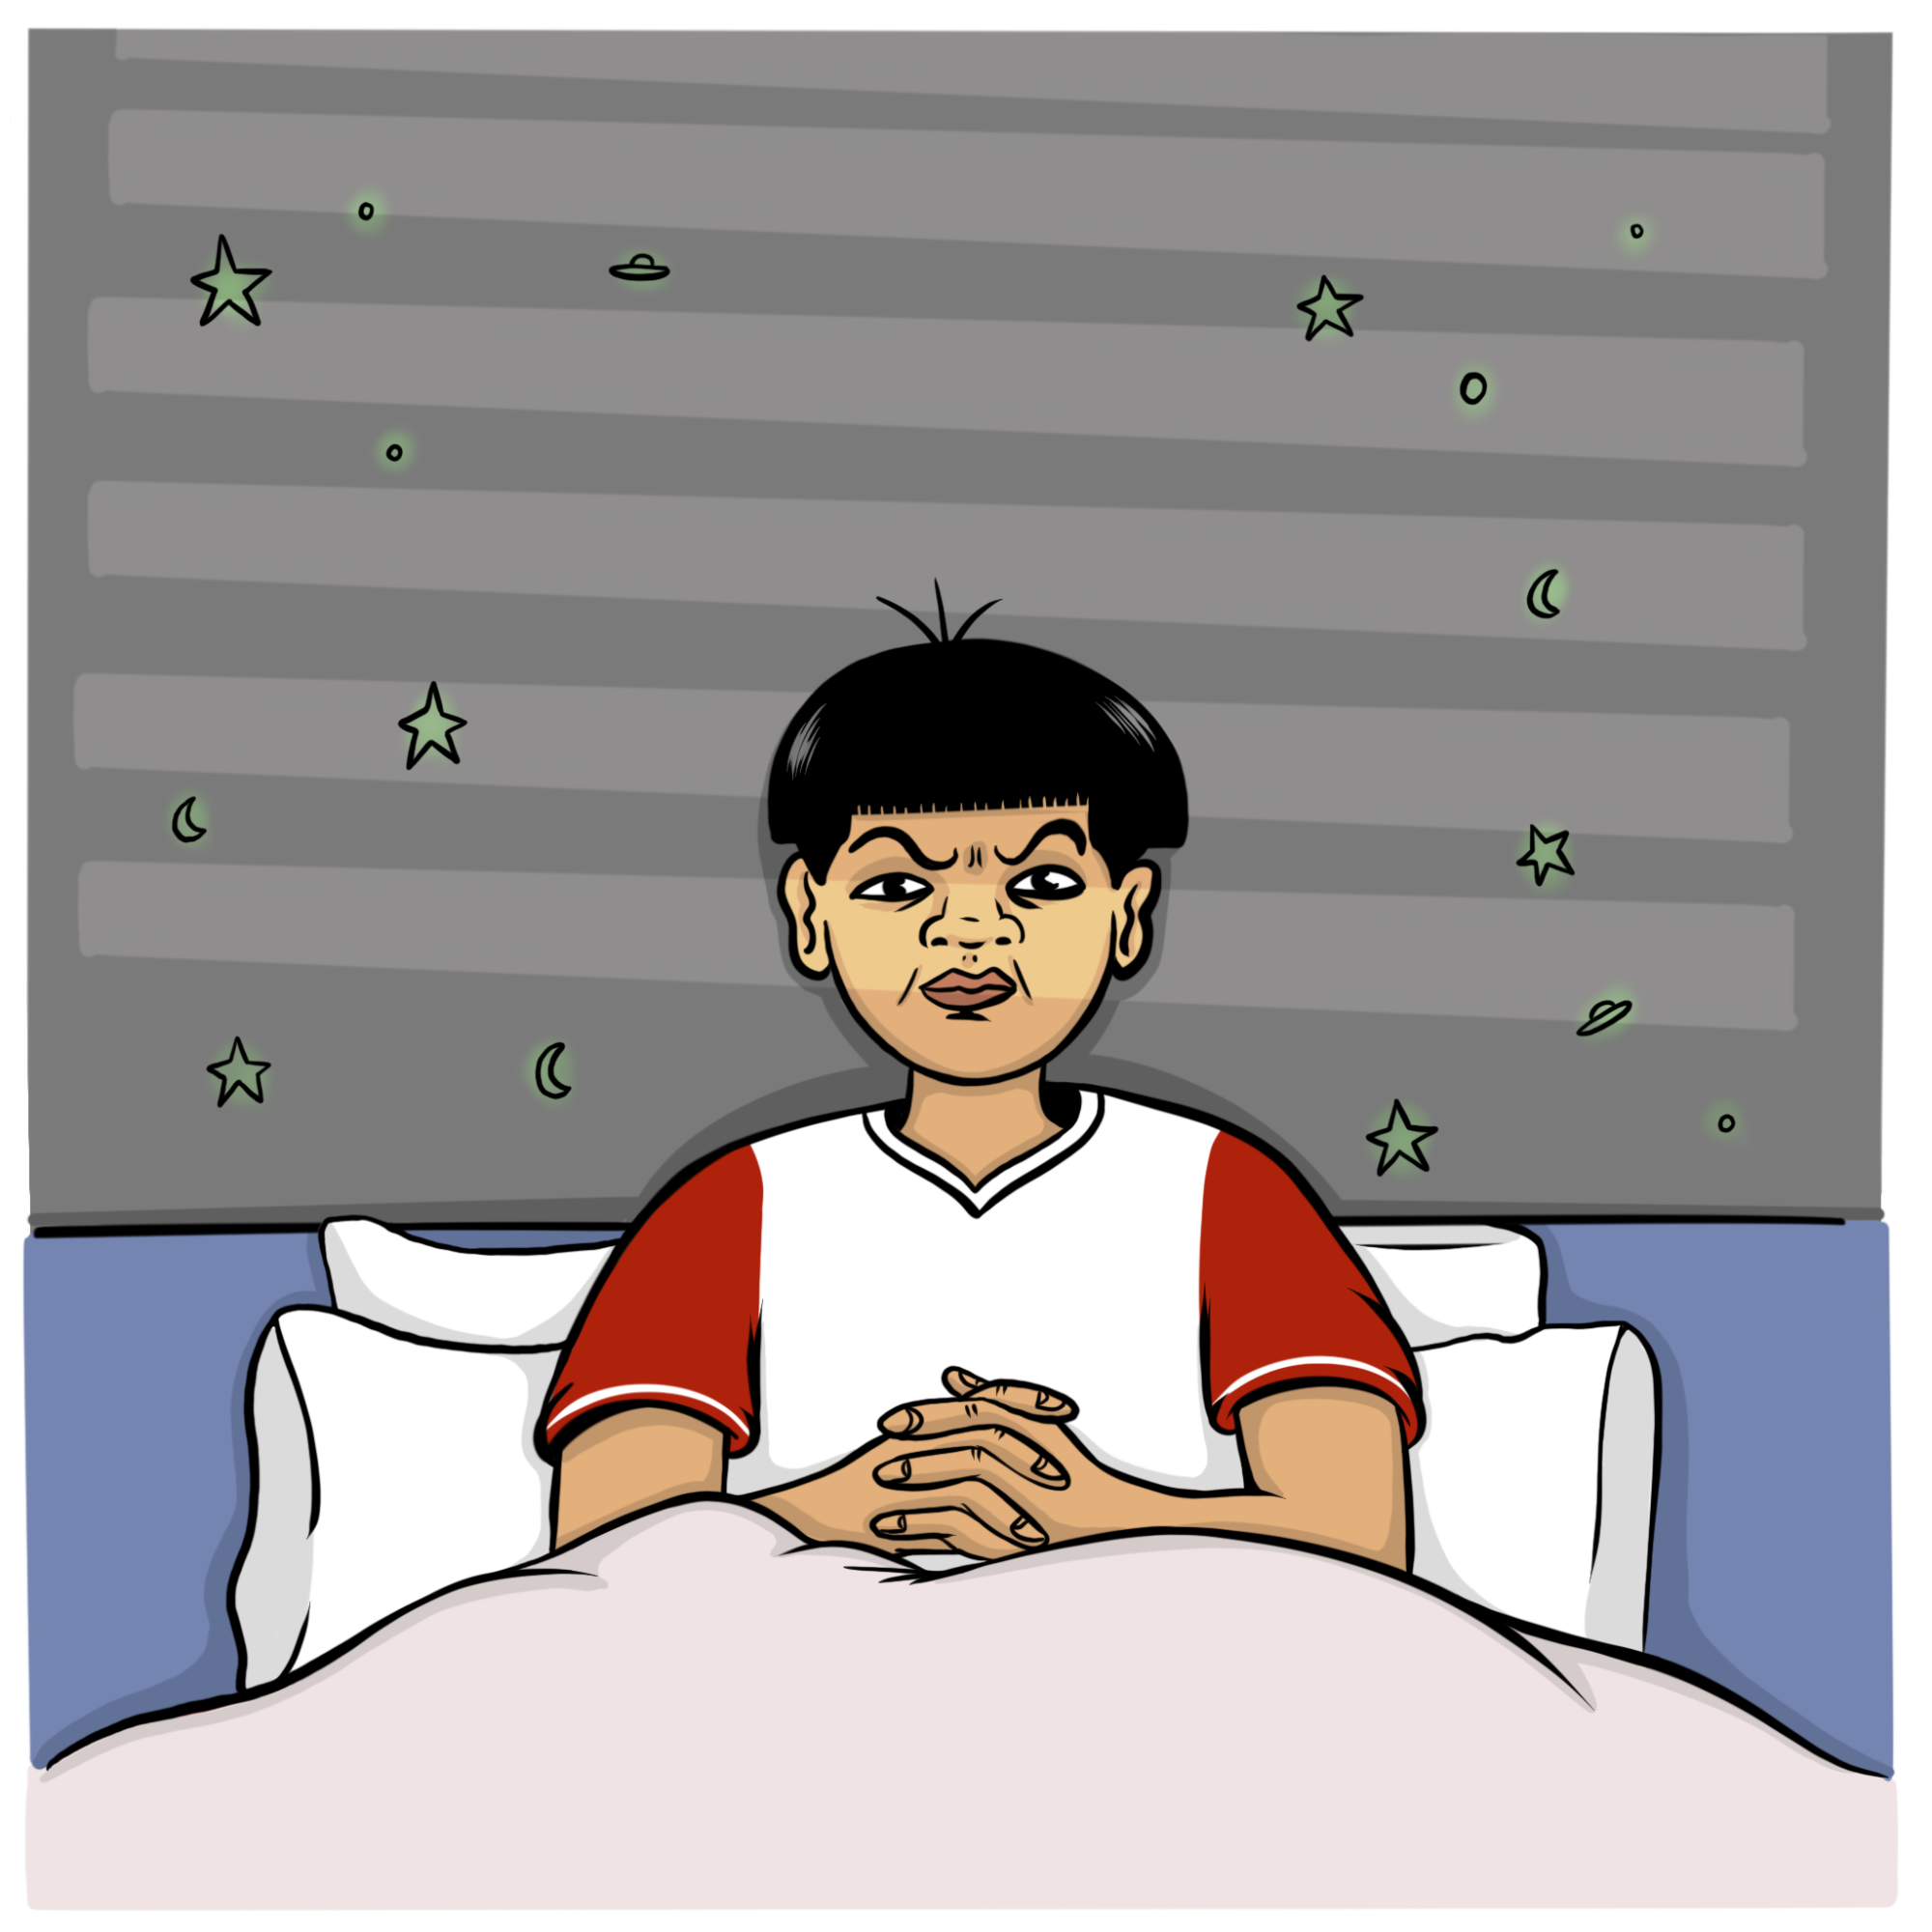 Illustration of an angry child in bed 